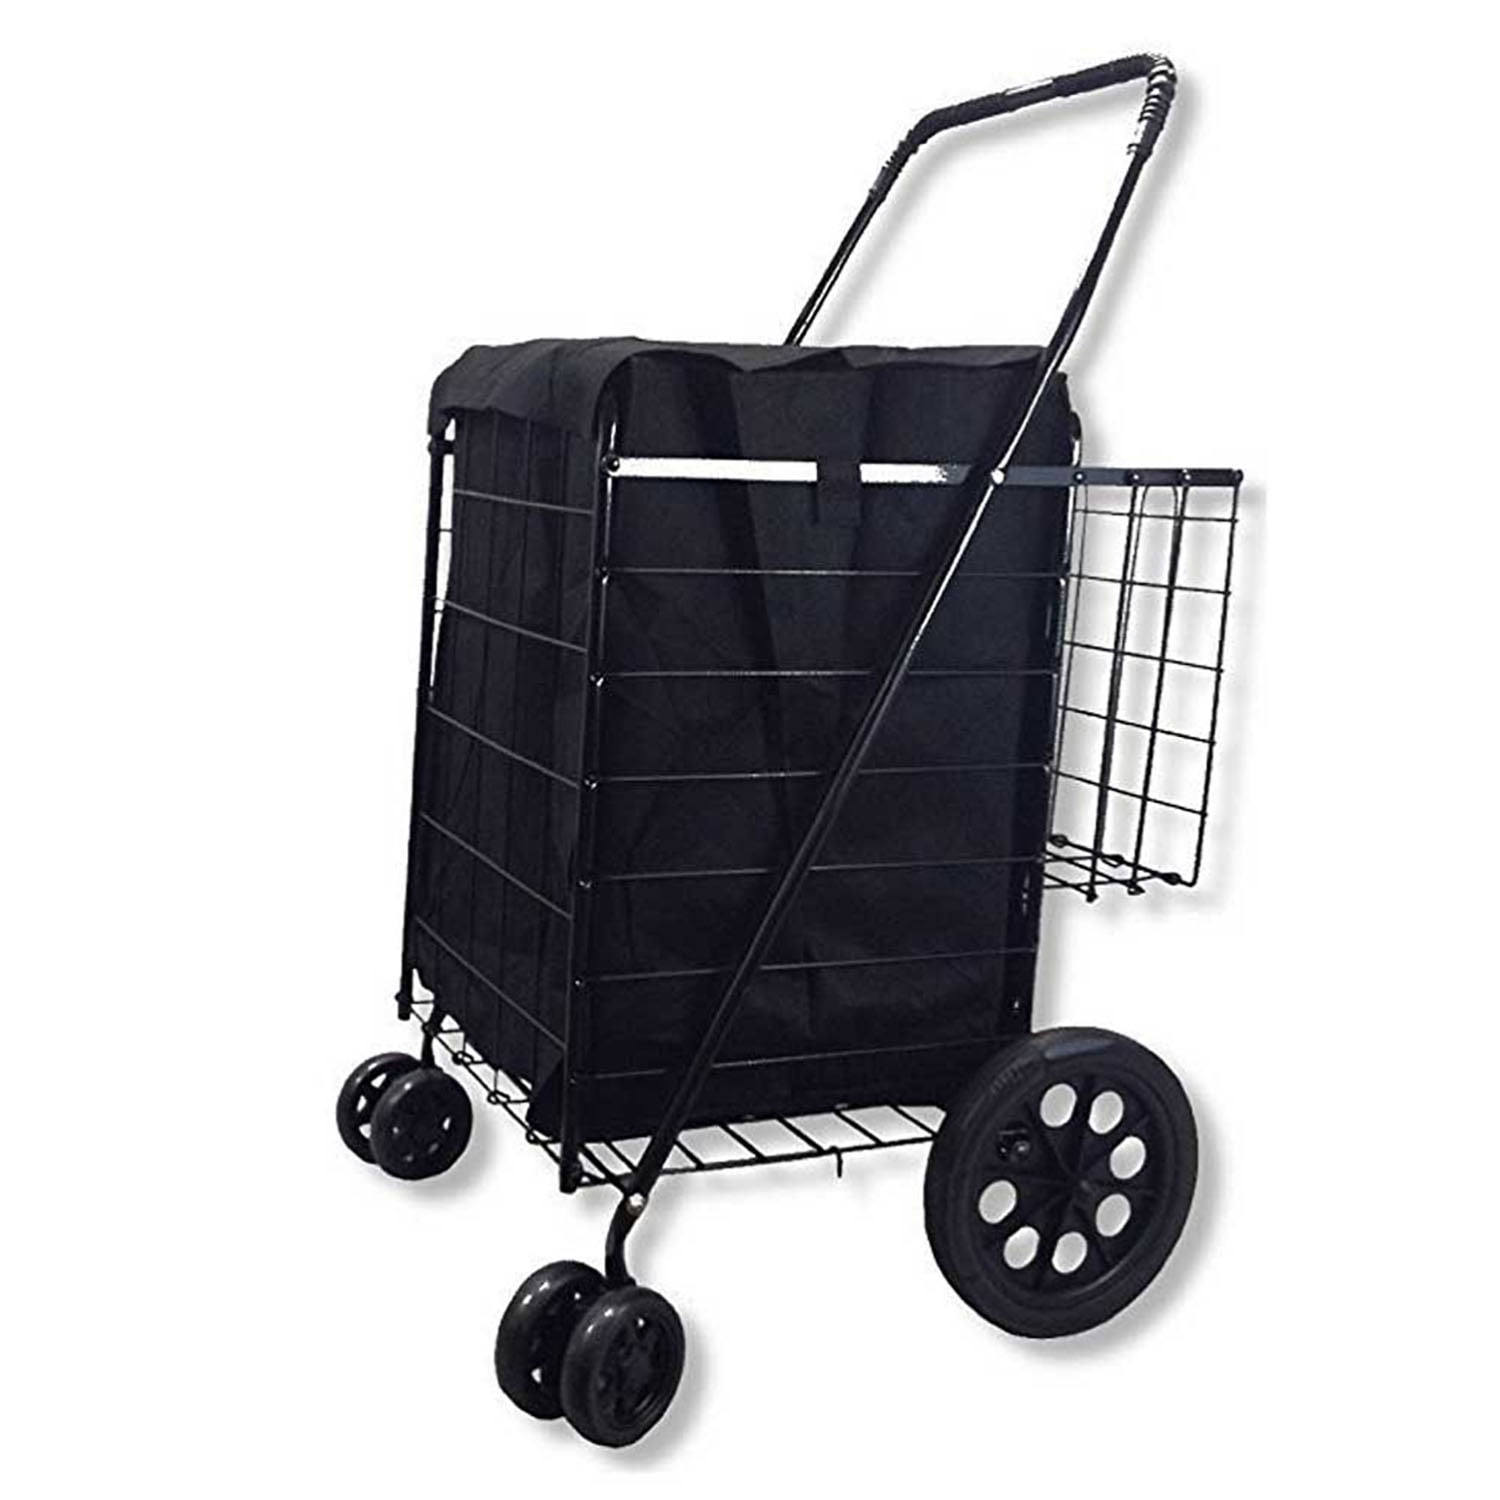 Shopping Cart Liner Made from Waterproof Material 18 X 15 X 24 Square Bottom Fits Snugly Into a Standard Shopping Cart Black Cover and Adjustable Straps for Easy and Secure Attachment 